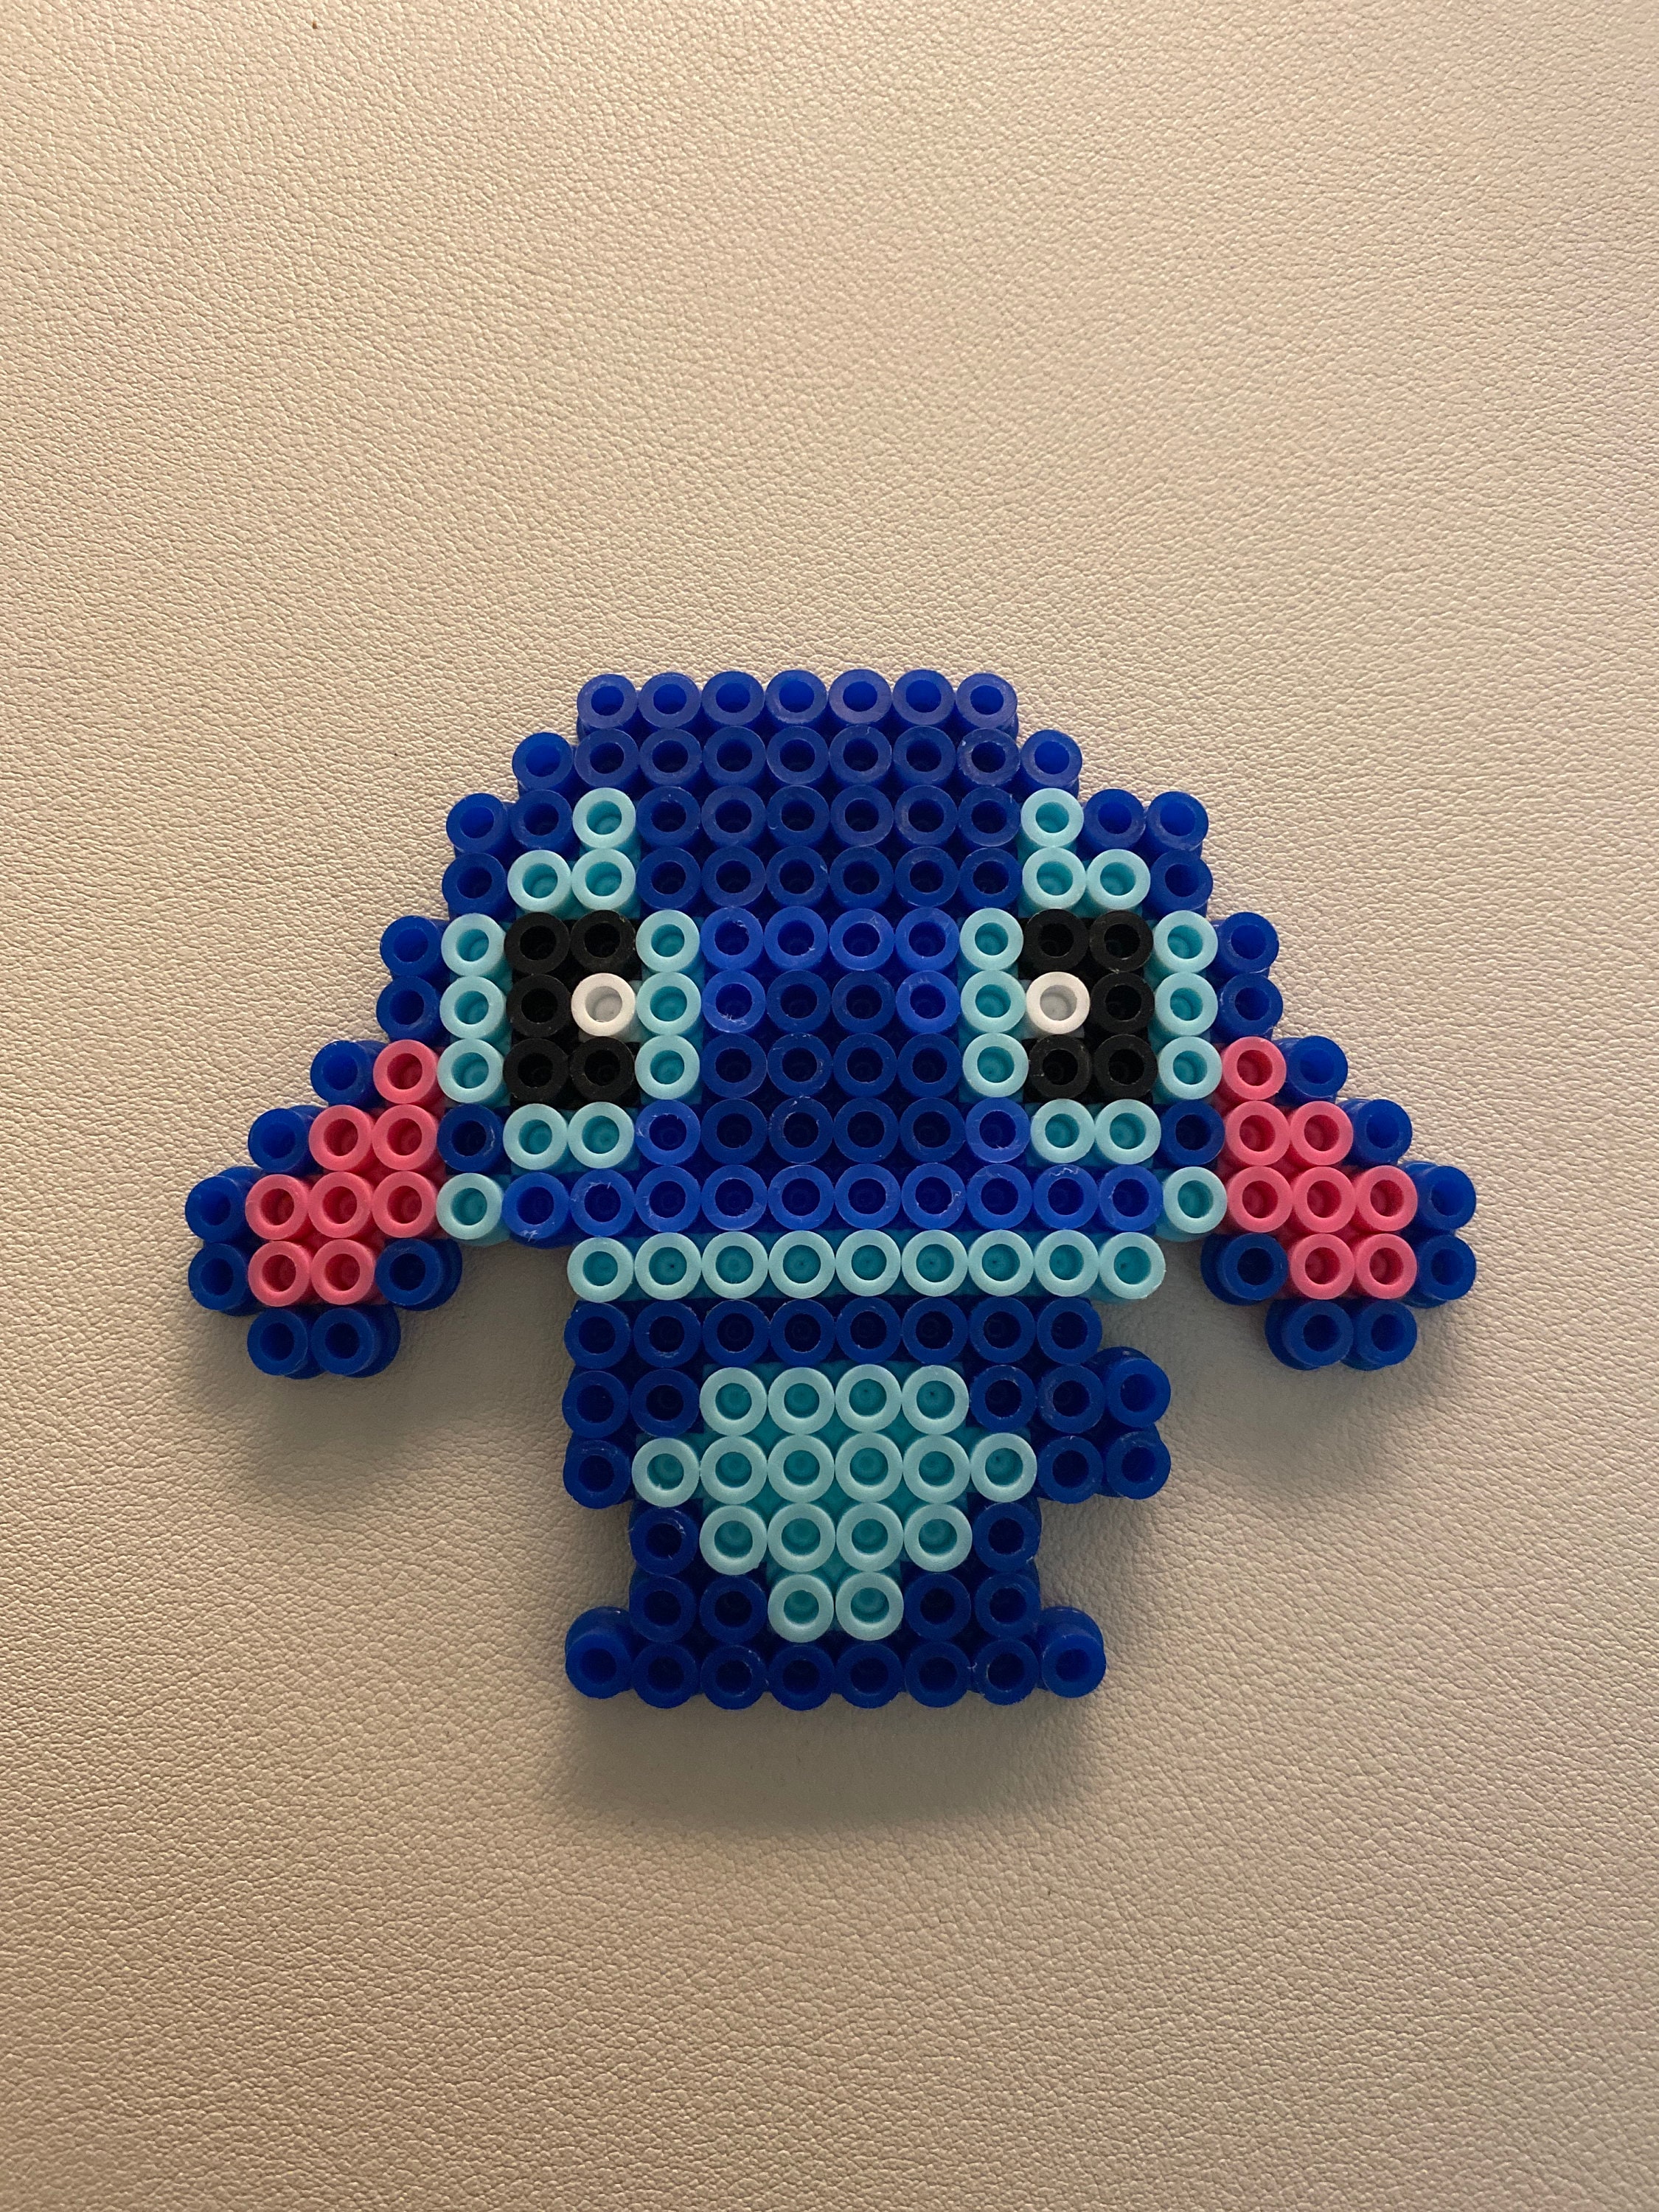 Advice: should I use white Perler beads for the background or just tape  this on a white foam board? : r/beadsprites